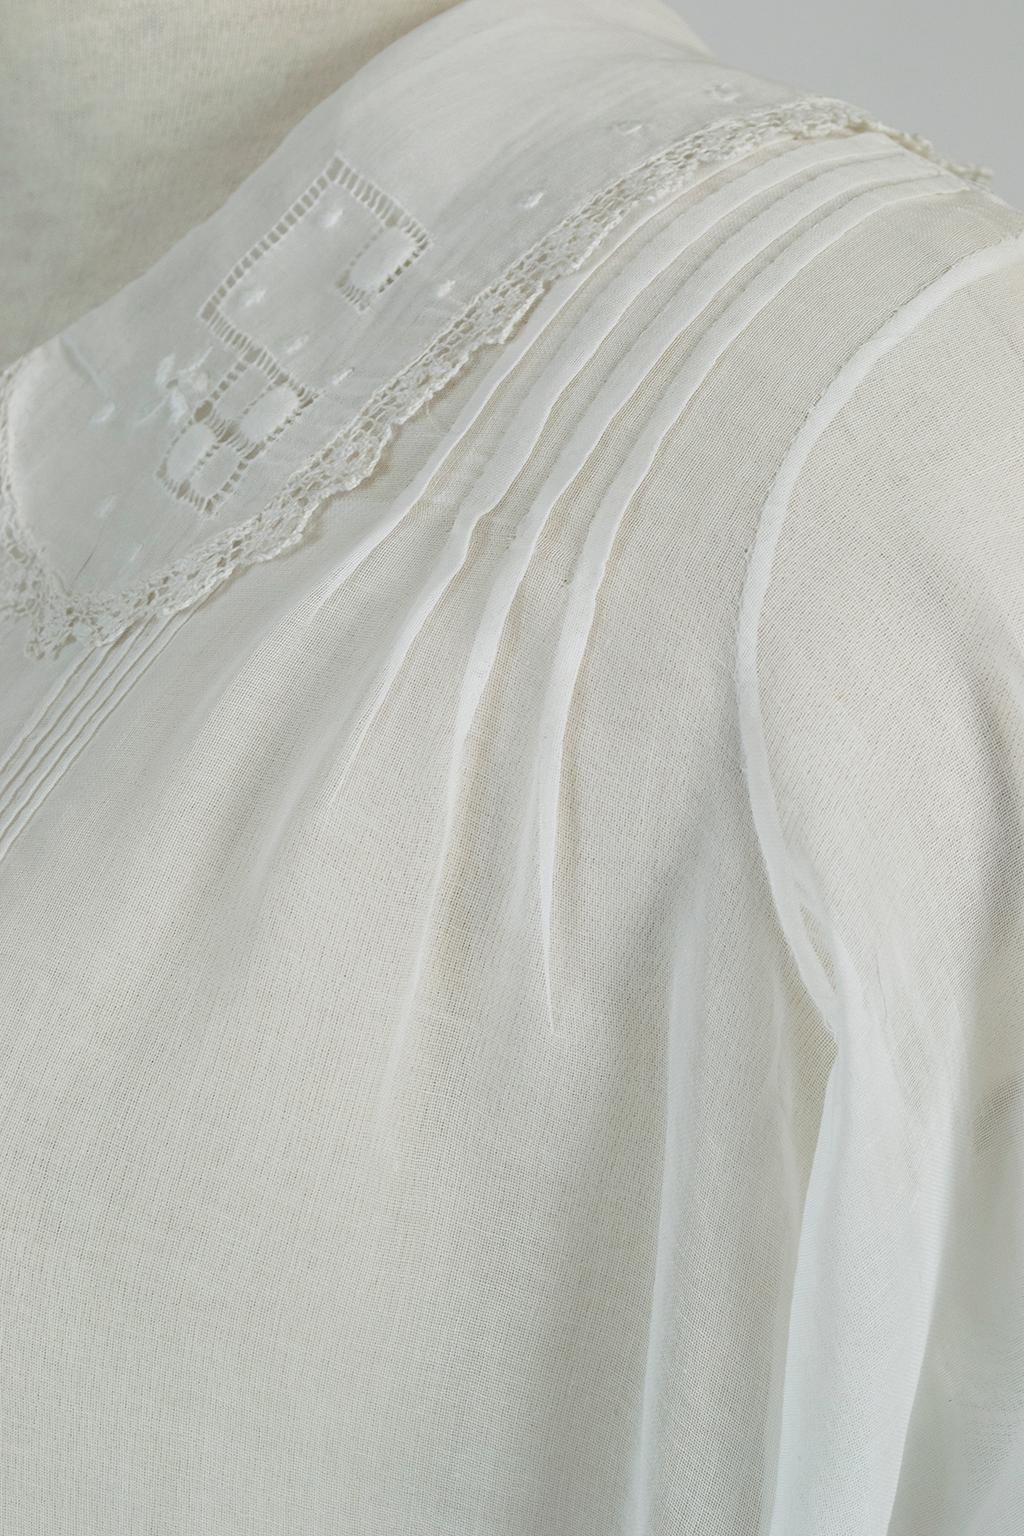 Edwardian White Embroidered Batiste Filet Lace Tie Waist Blouse - XS - S, 1910s For Sale 1